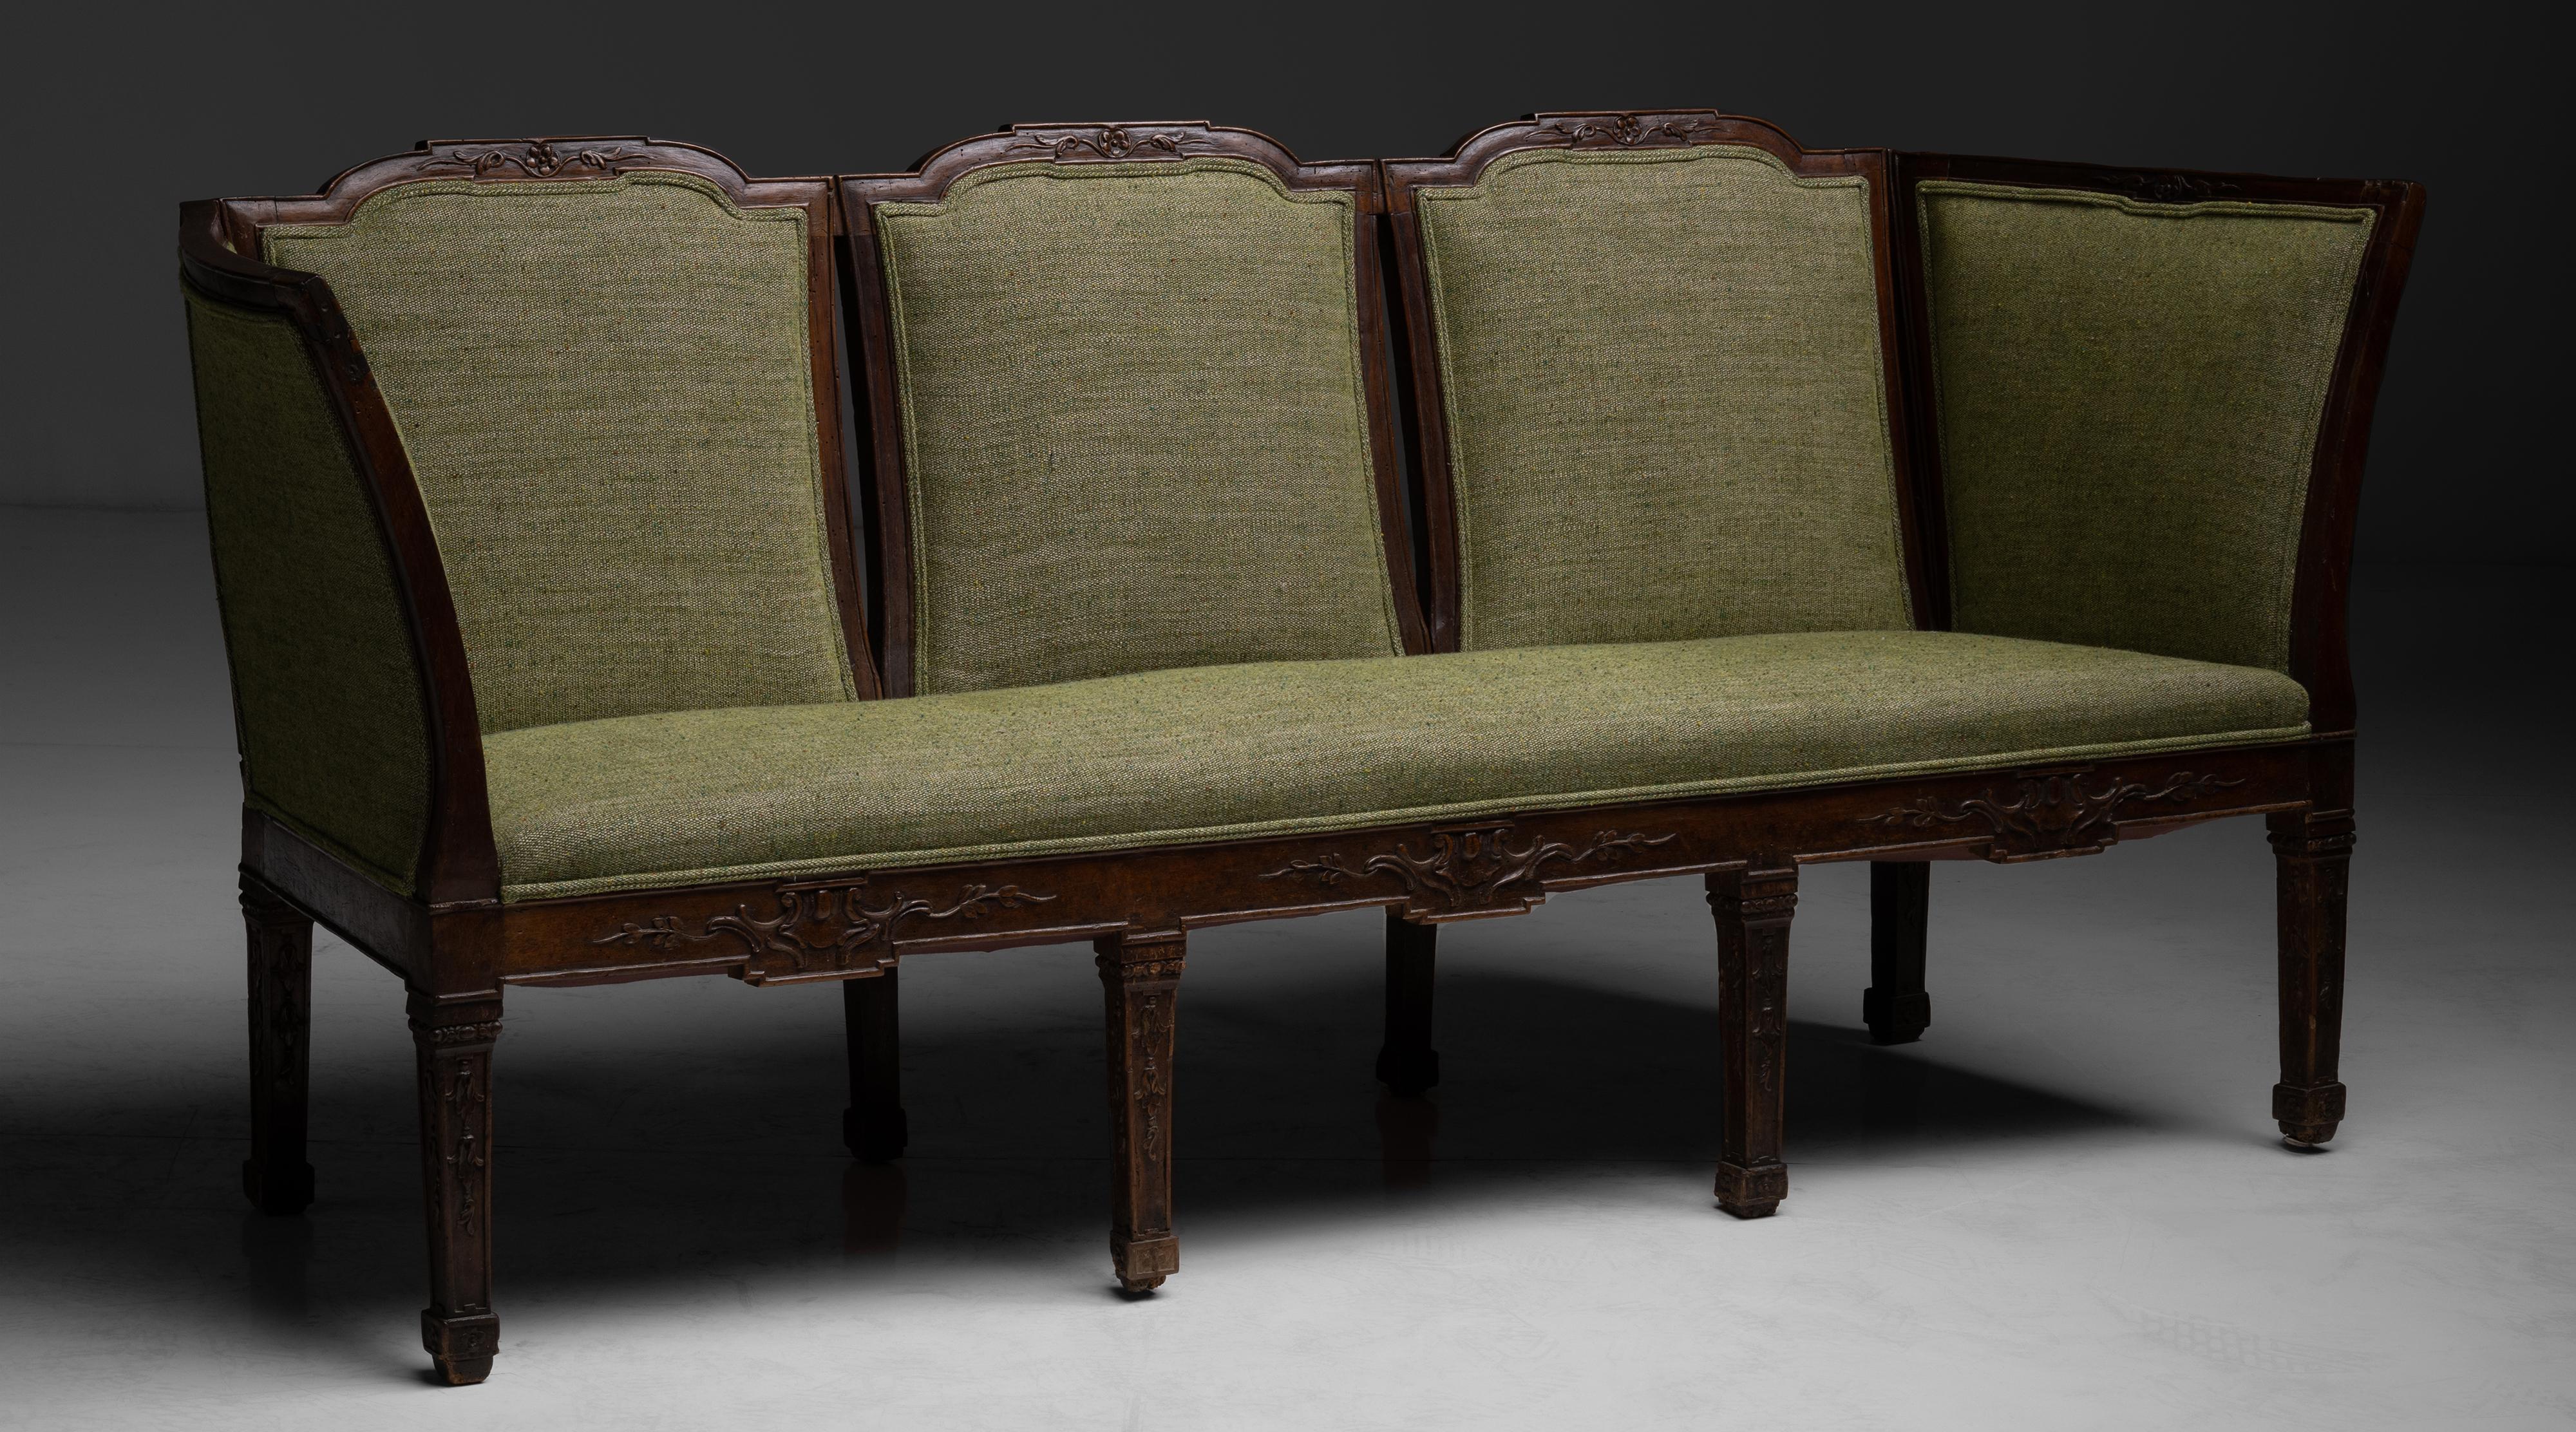 Hall Sofa in Linen Wool Blend, France circa 1840

Intricately carved wooden frame newly upholstered in pistachio linen wool blend by Marvic.

Measures 82”L x 27”d x 36.5”h x 18”seat.